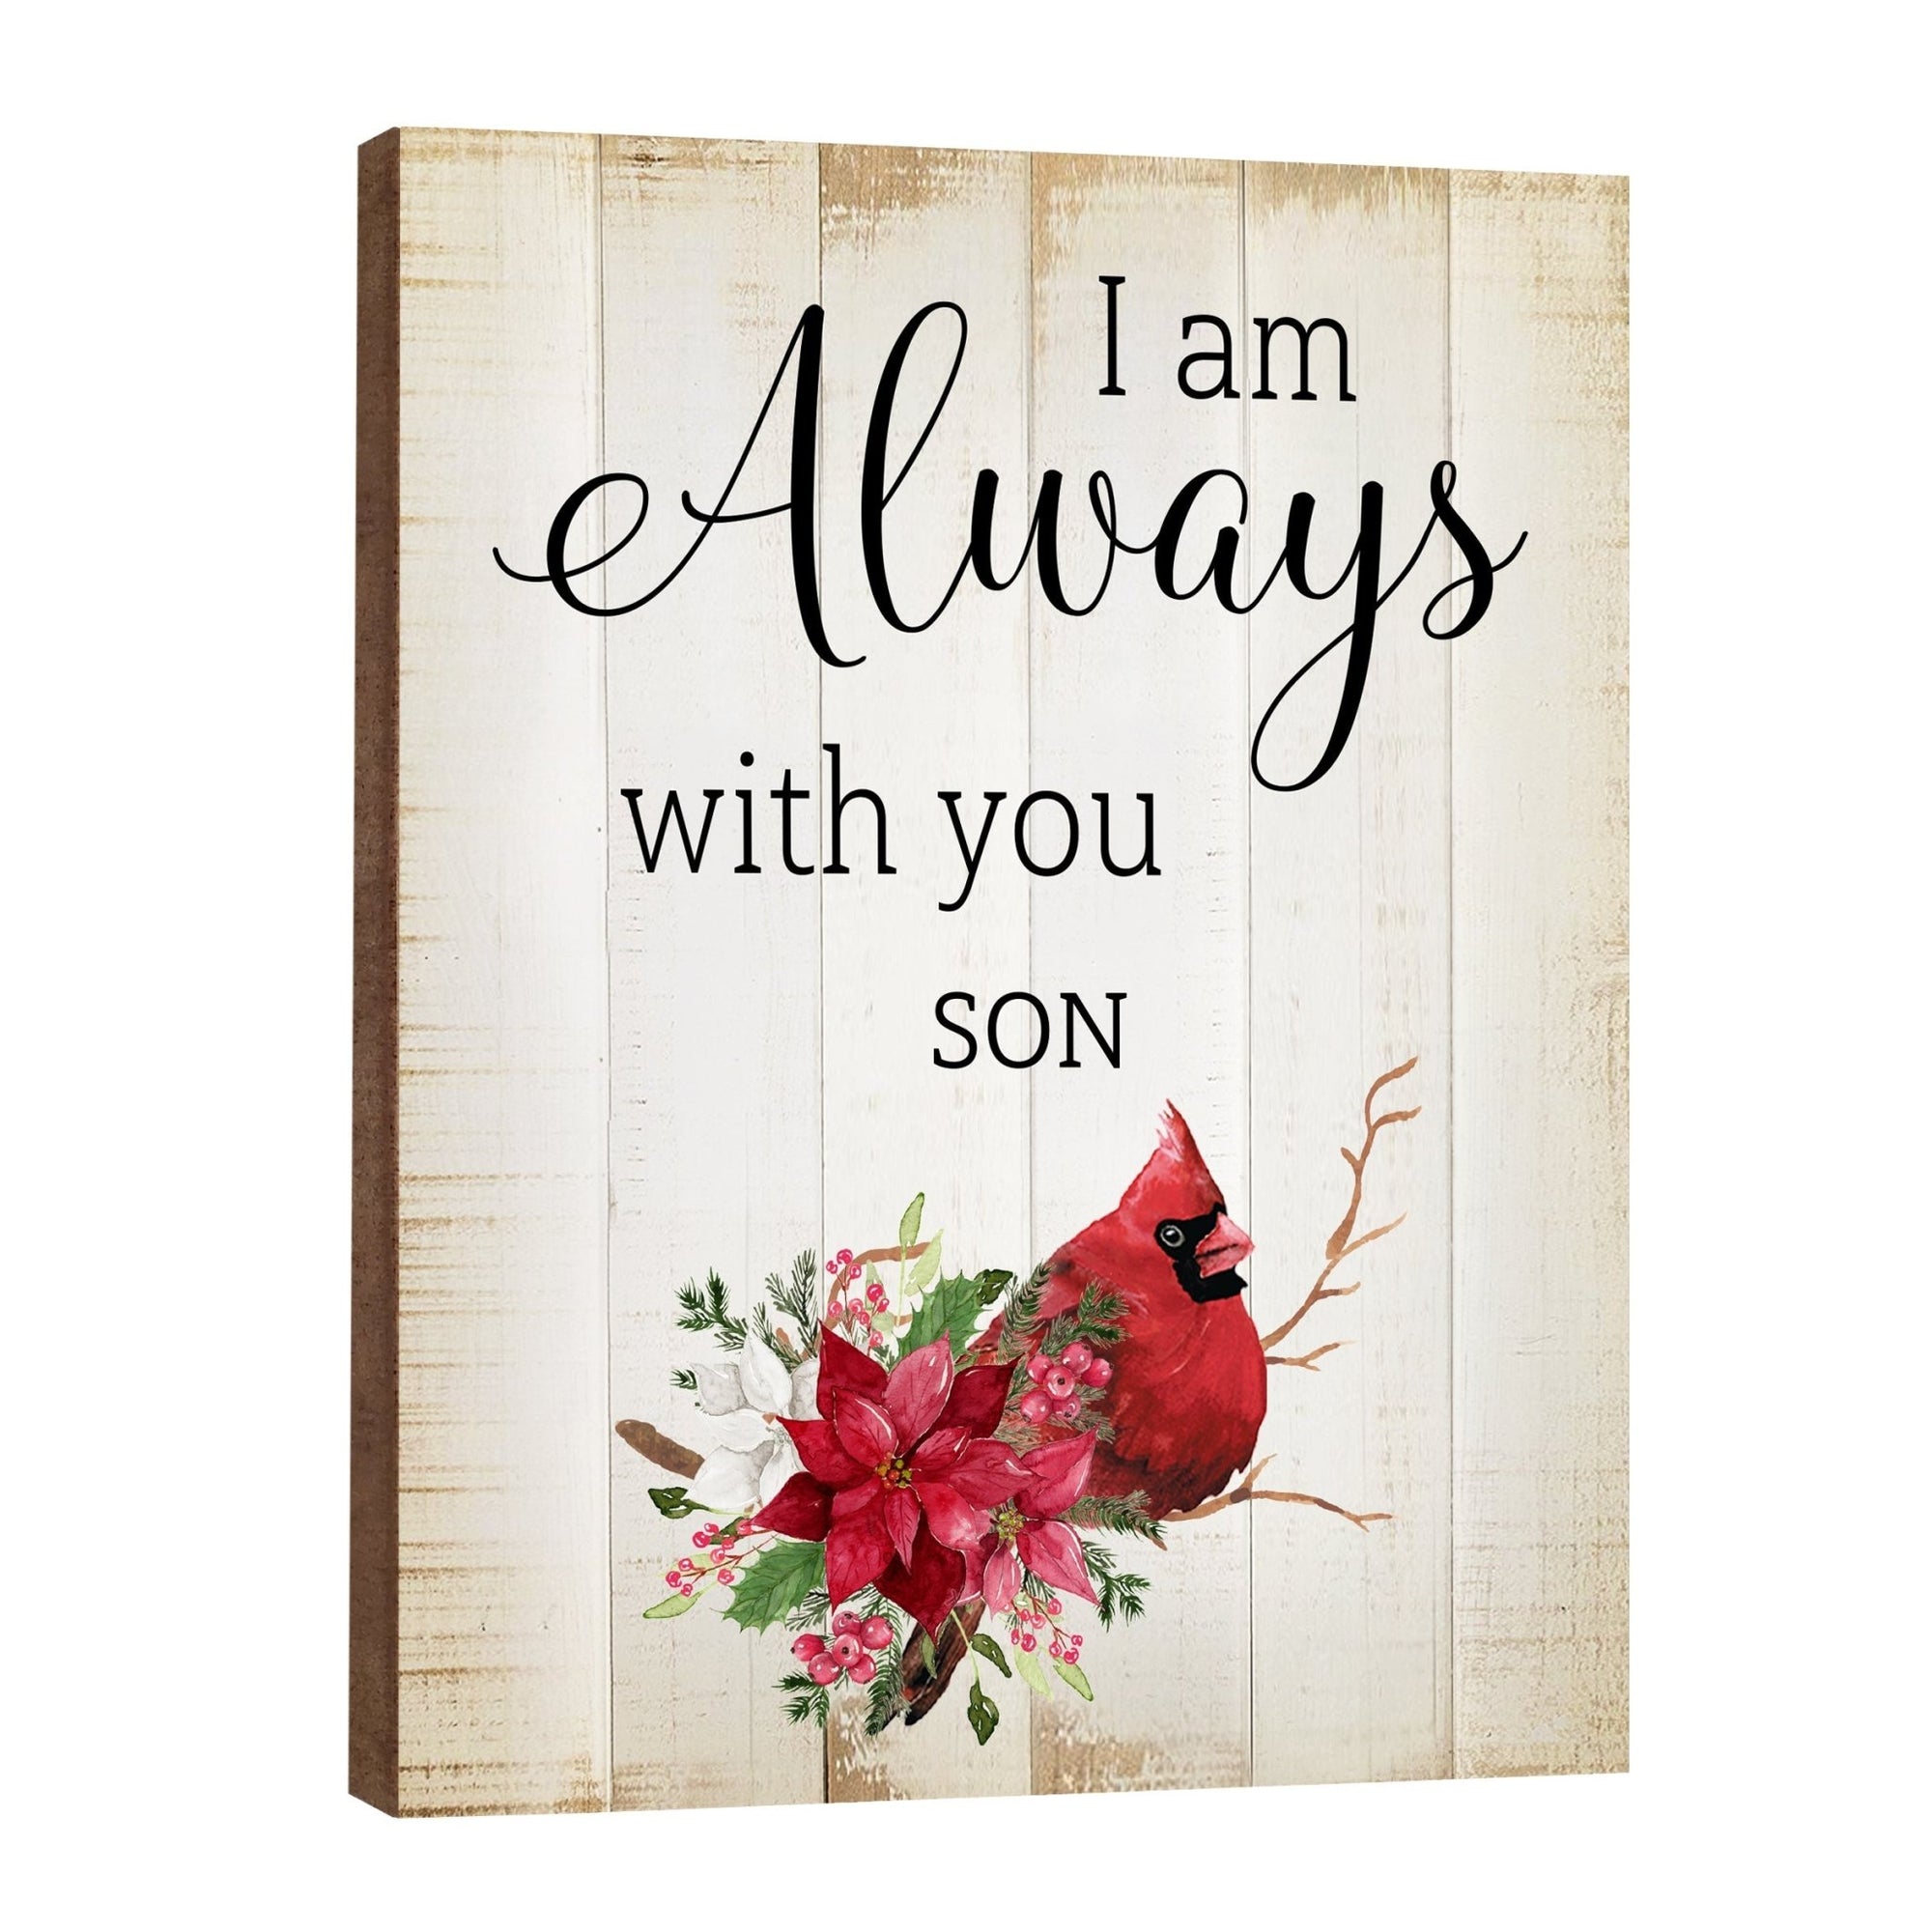 Cardinal-themed memorial decorations to keep the memory of your loved ones alive